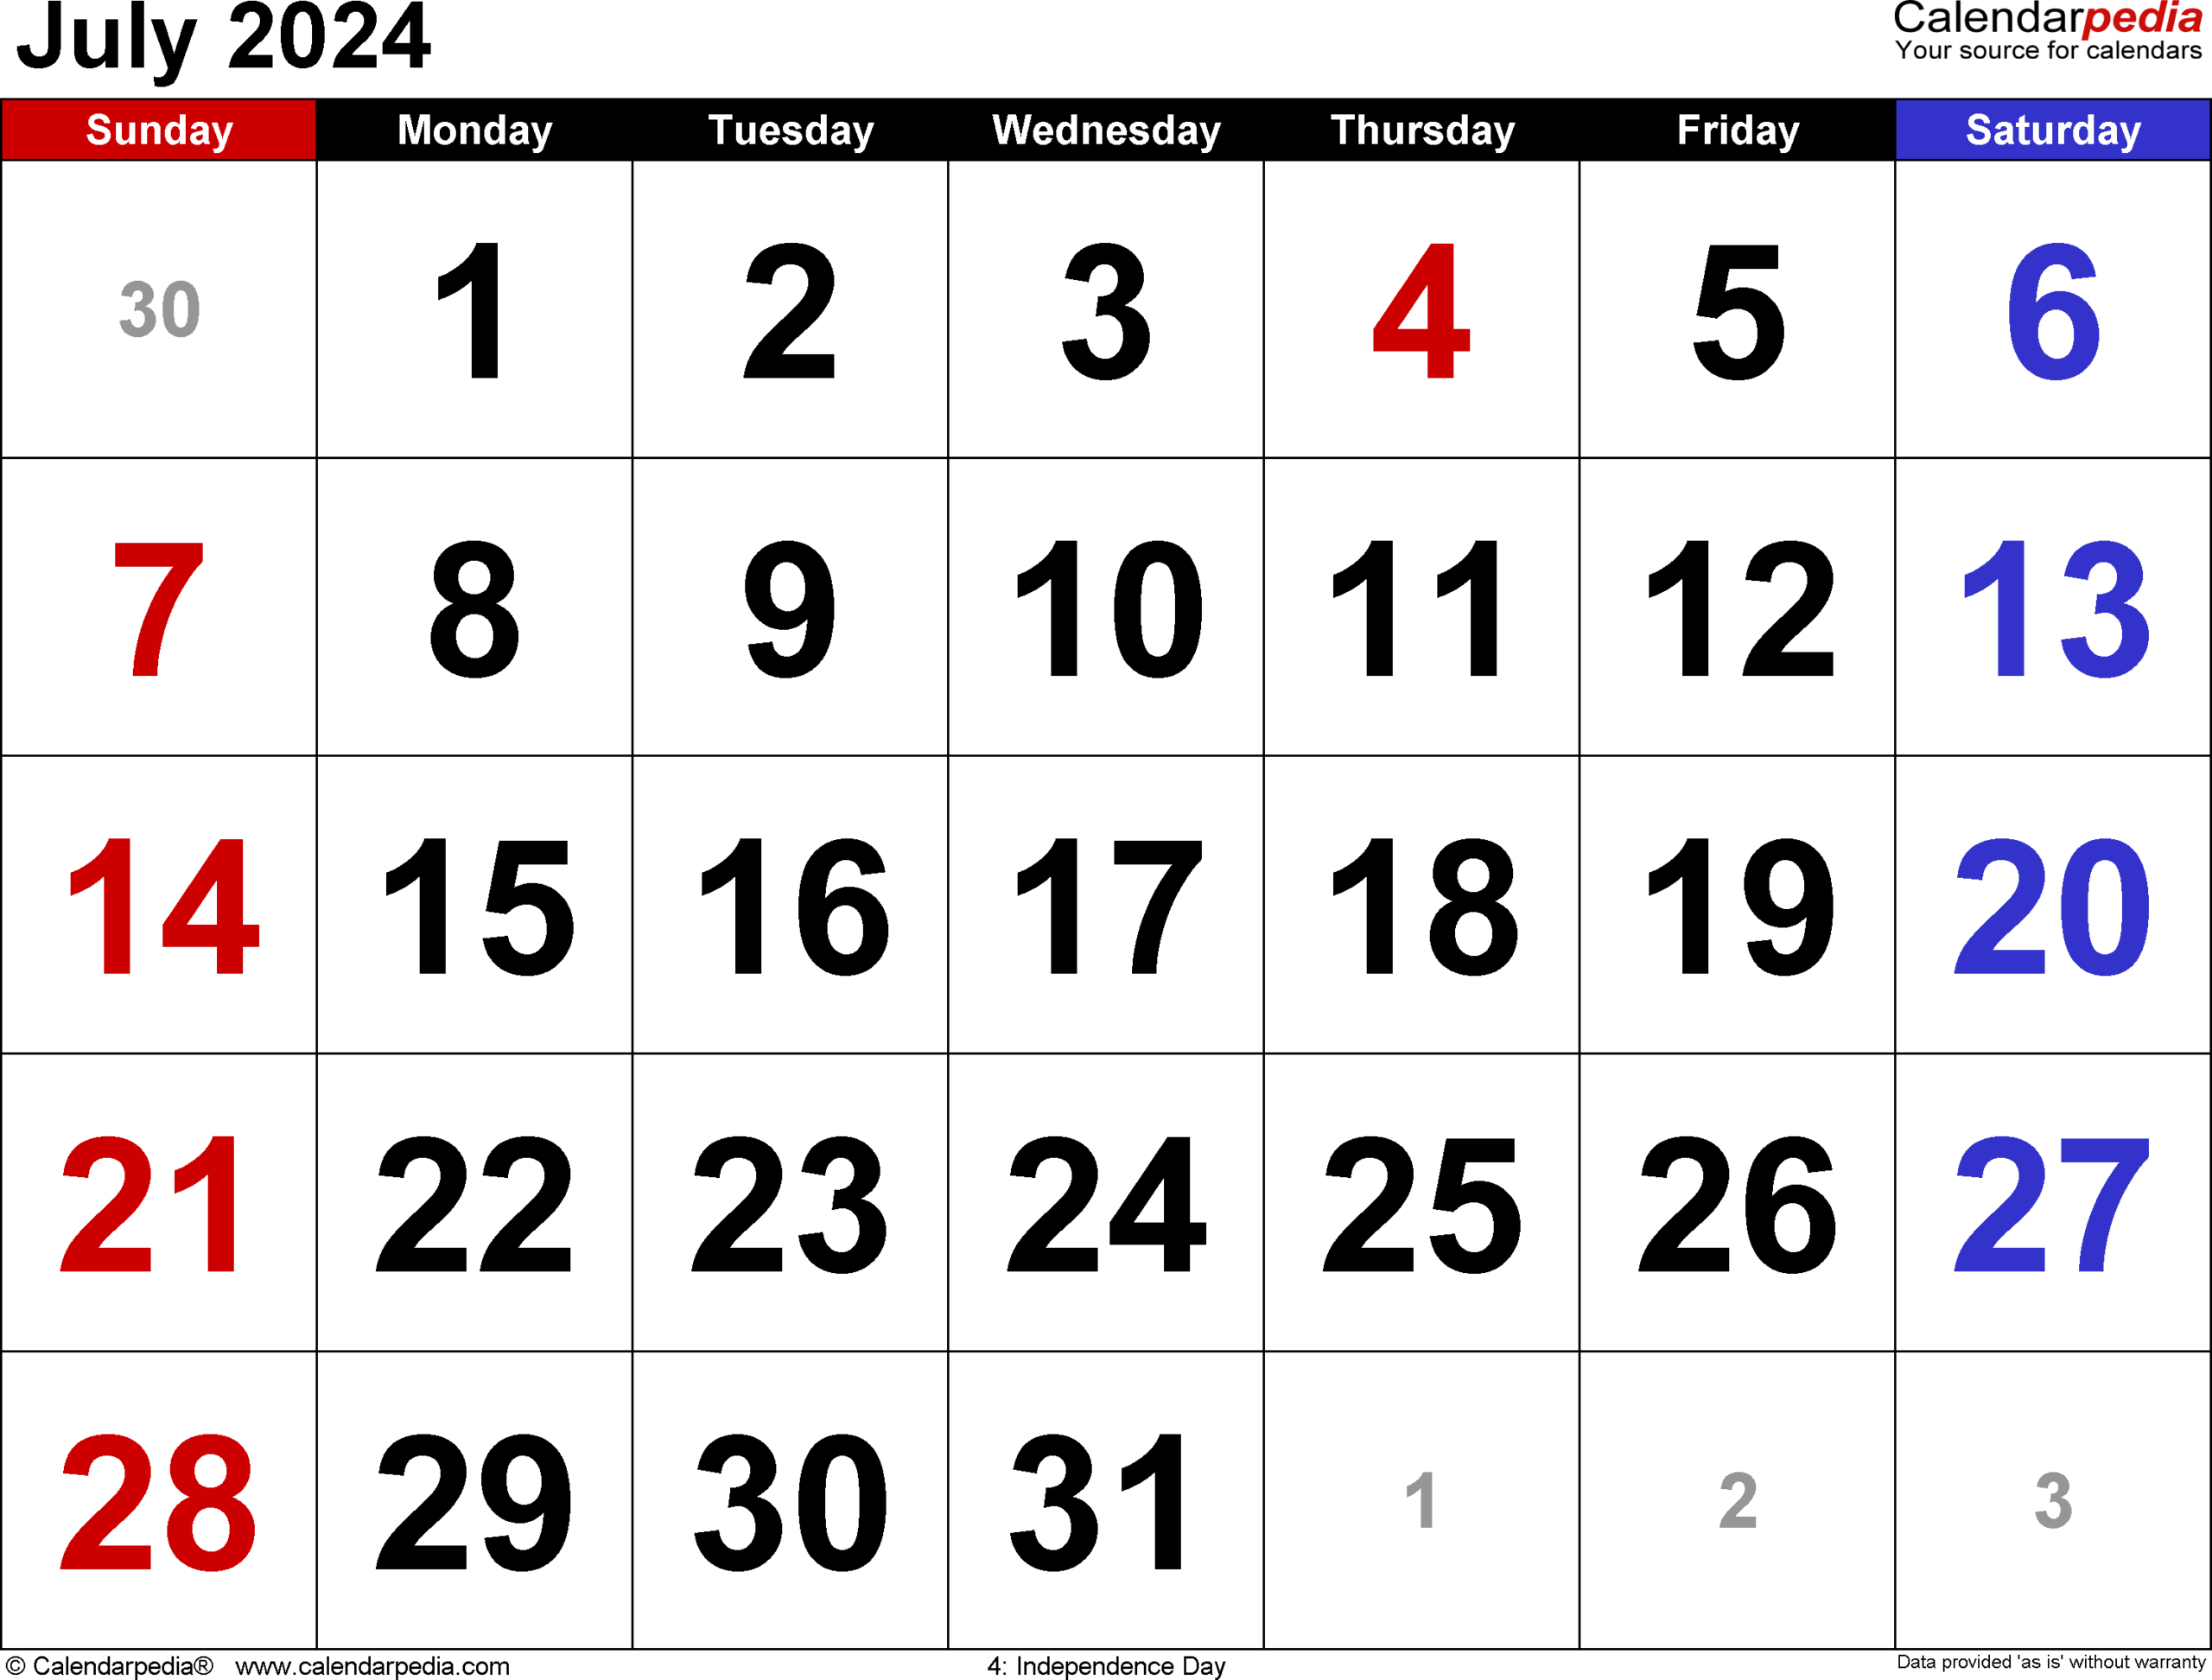 July 2024 Calendar | Templates For Word, Excel And Pdf throughout July 2024 Calendar in Word